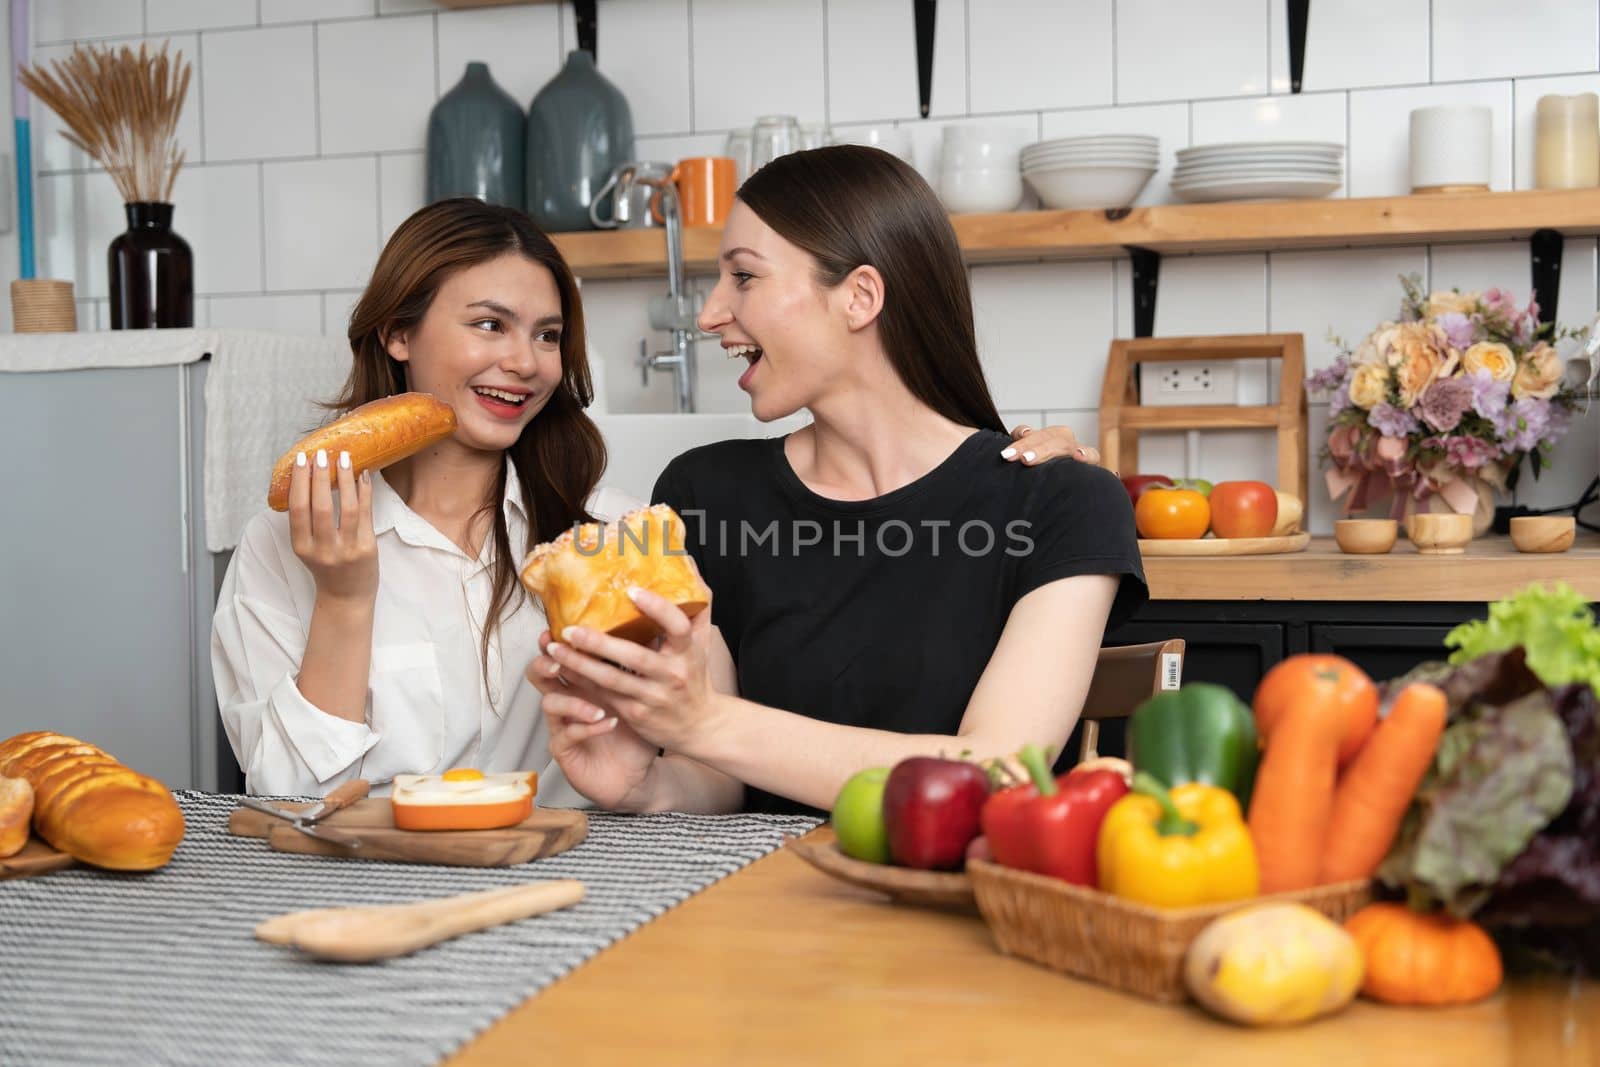 Female and female or LGBT couples are happily cooking bread together with happy smiling face in kitchen at home..